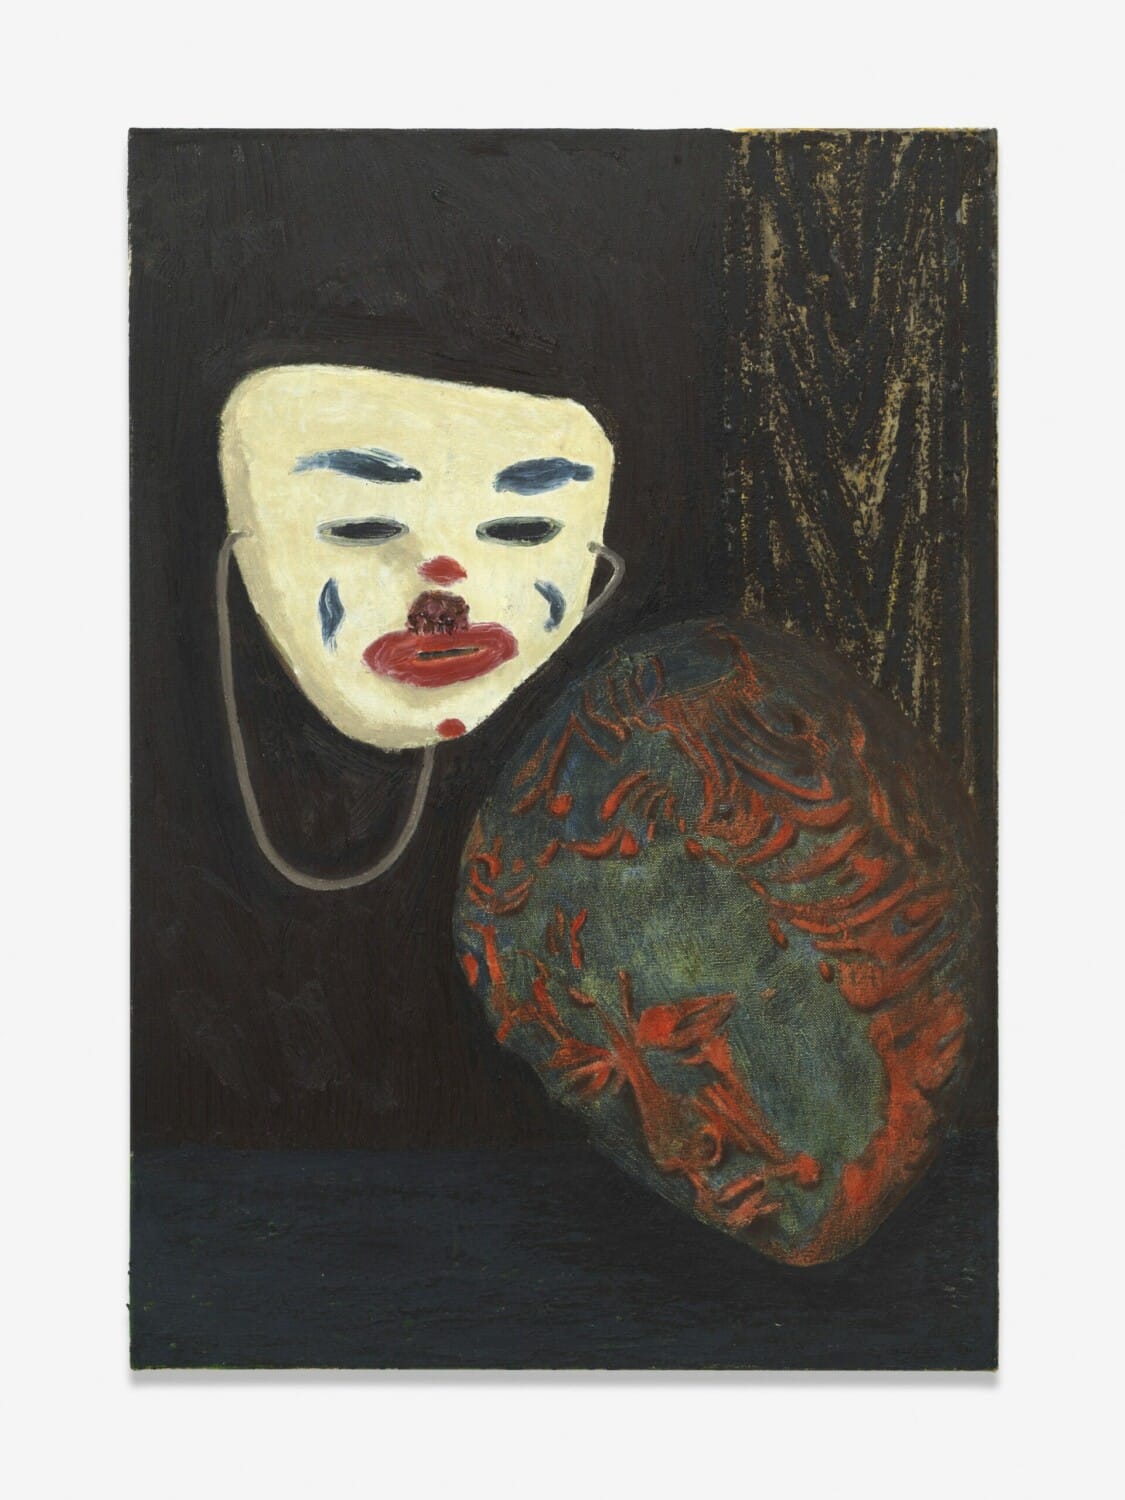 Mamma Andersson, 'Clown', 2021. Oil and acrylic on canvas, 67.3 x 47.3 cm (26 1/2 x 18 5/8in). Copyright Mamma Andersson. Courtesy the artist and Stephen Friedman Gallery, London. Photo by Serge Hasenboehler.